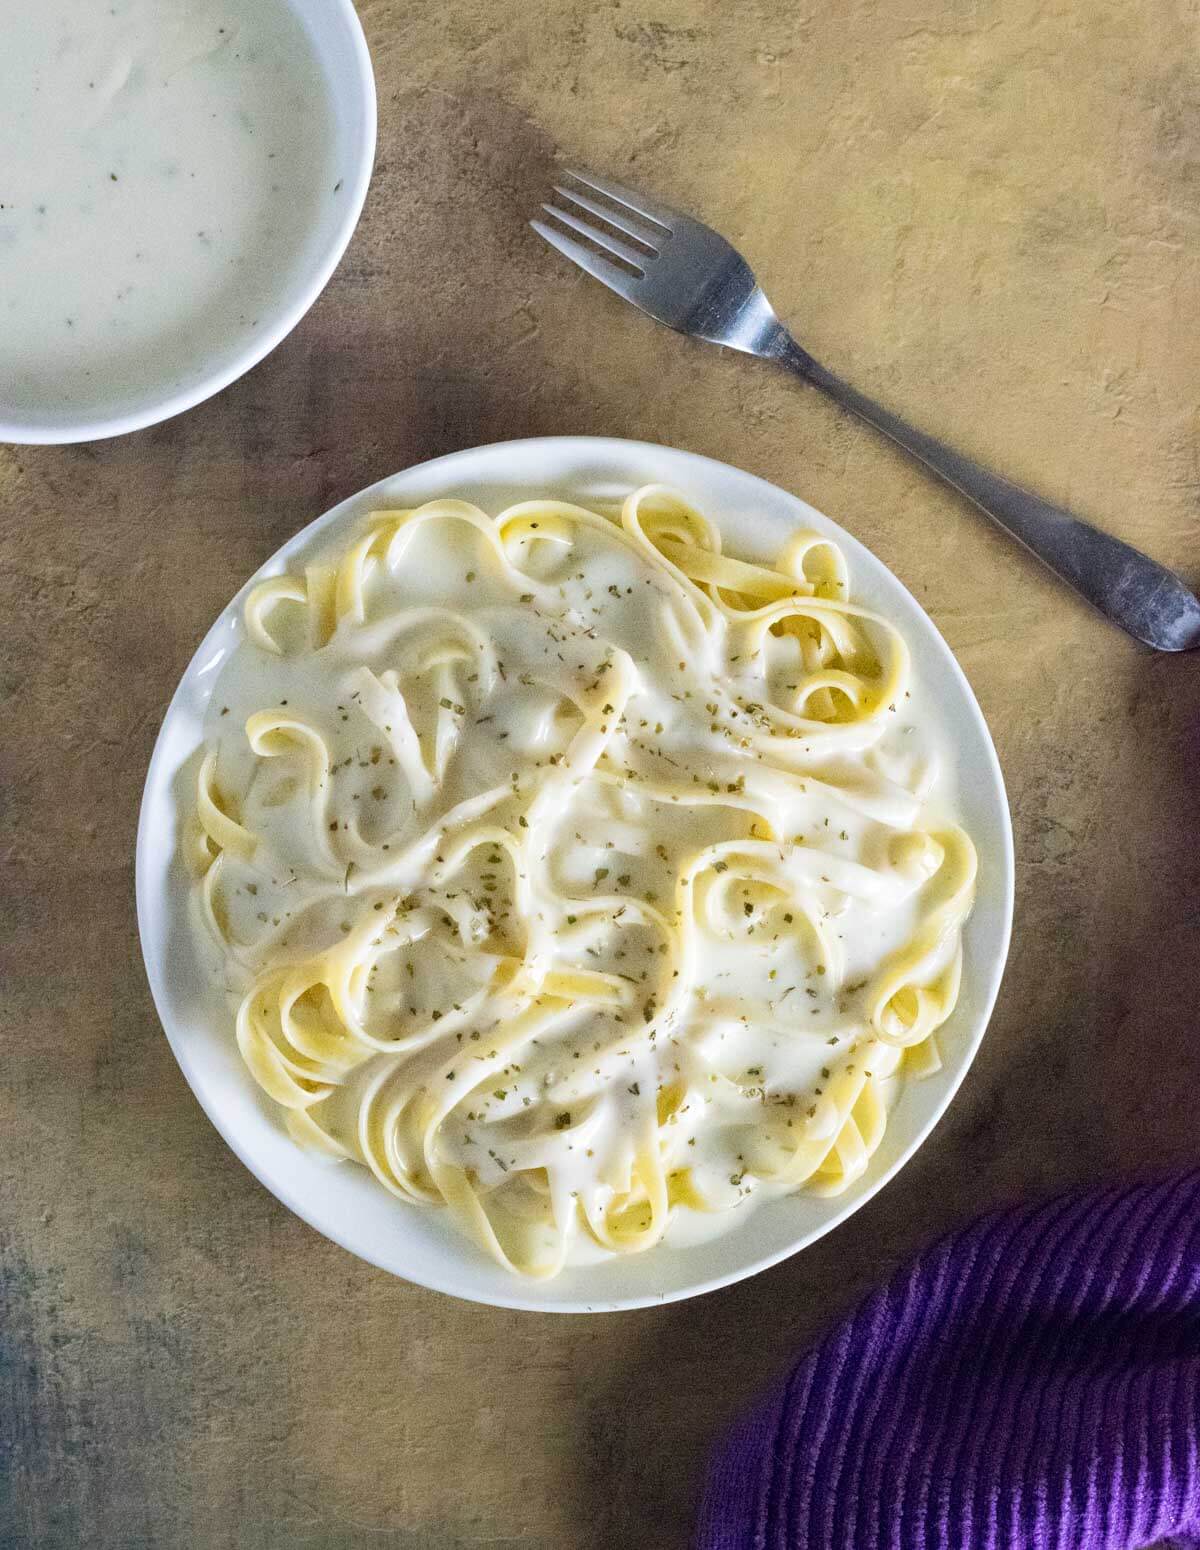 Alfredo sauce without Parmesan cheese.